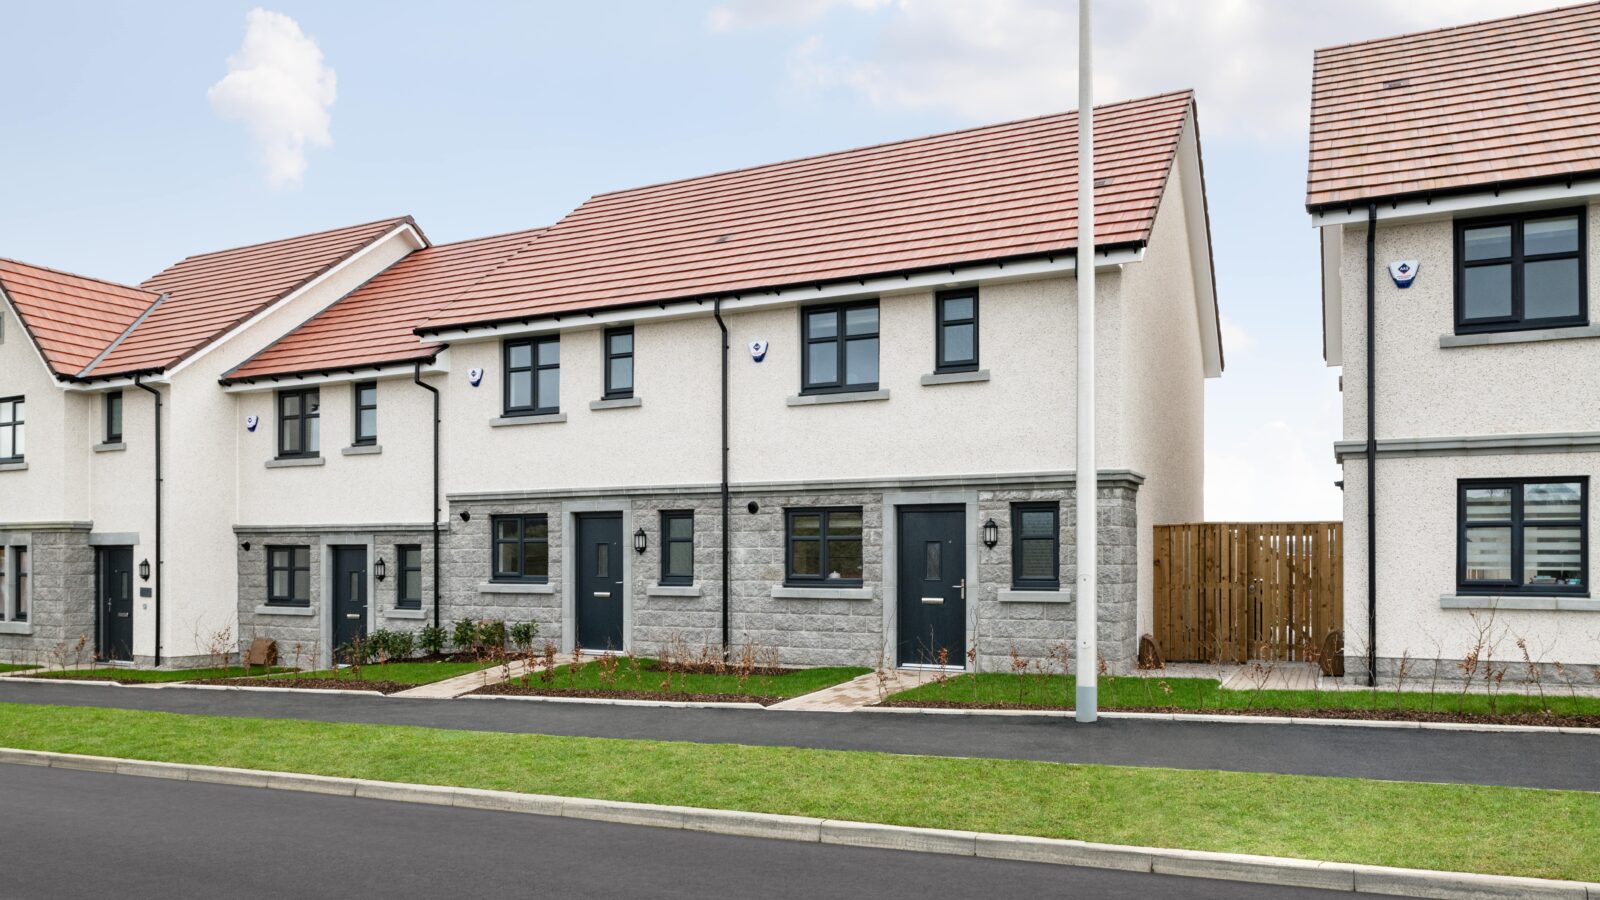 Cala unveils trio of terraced showhomes